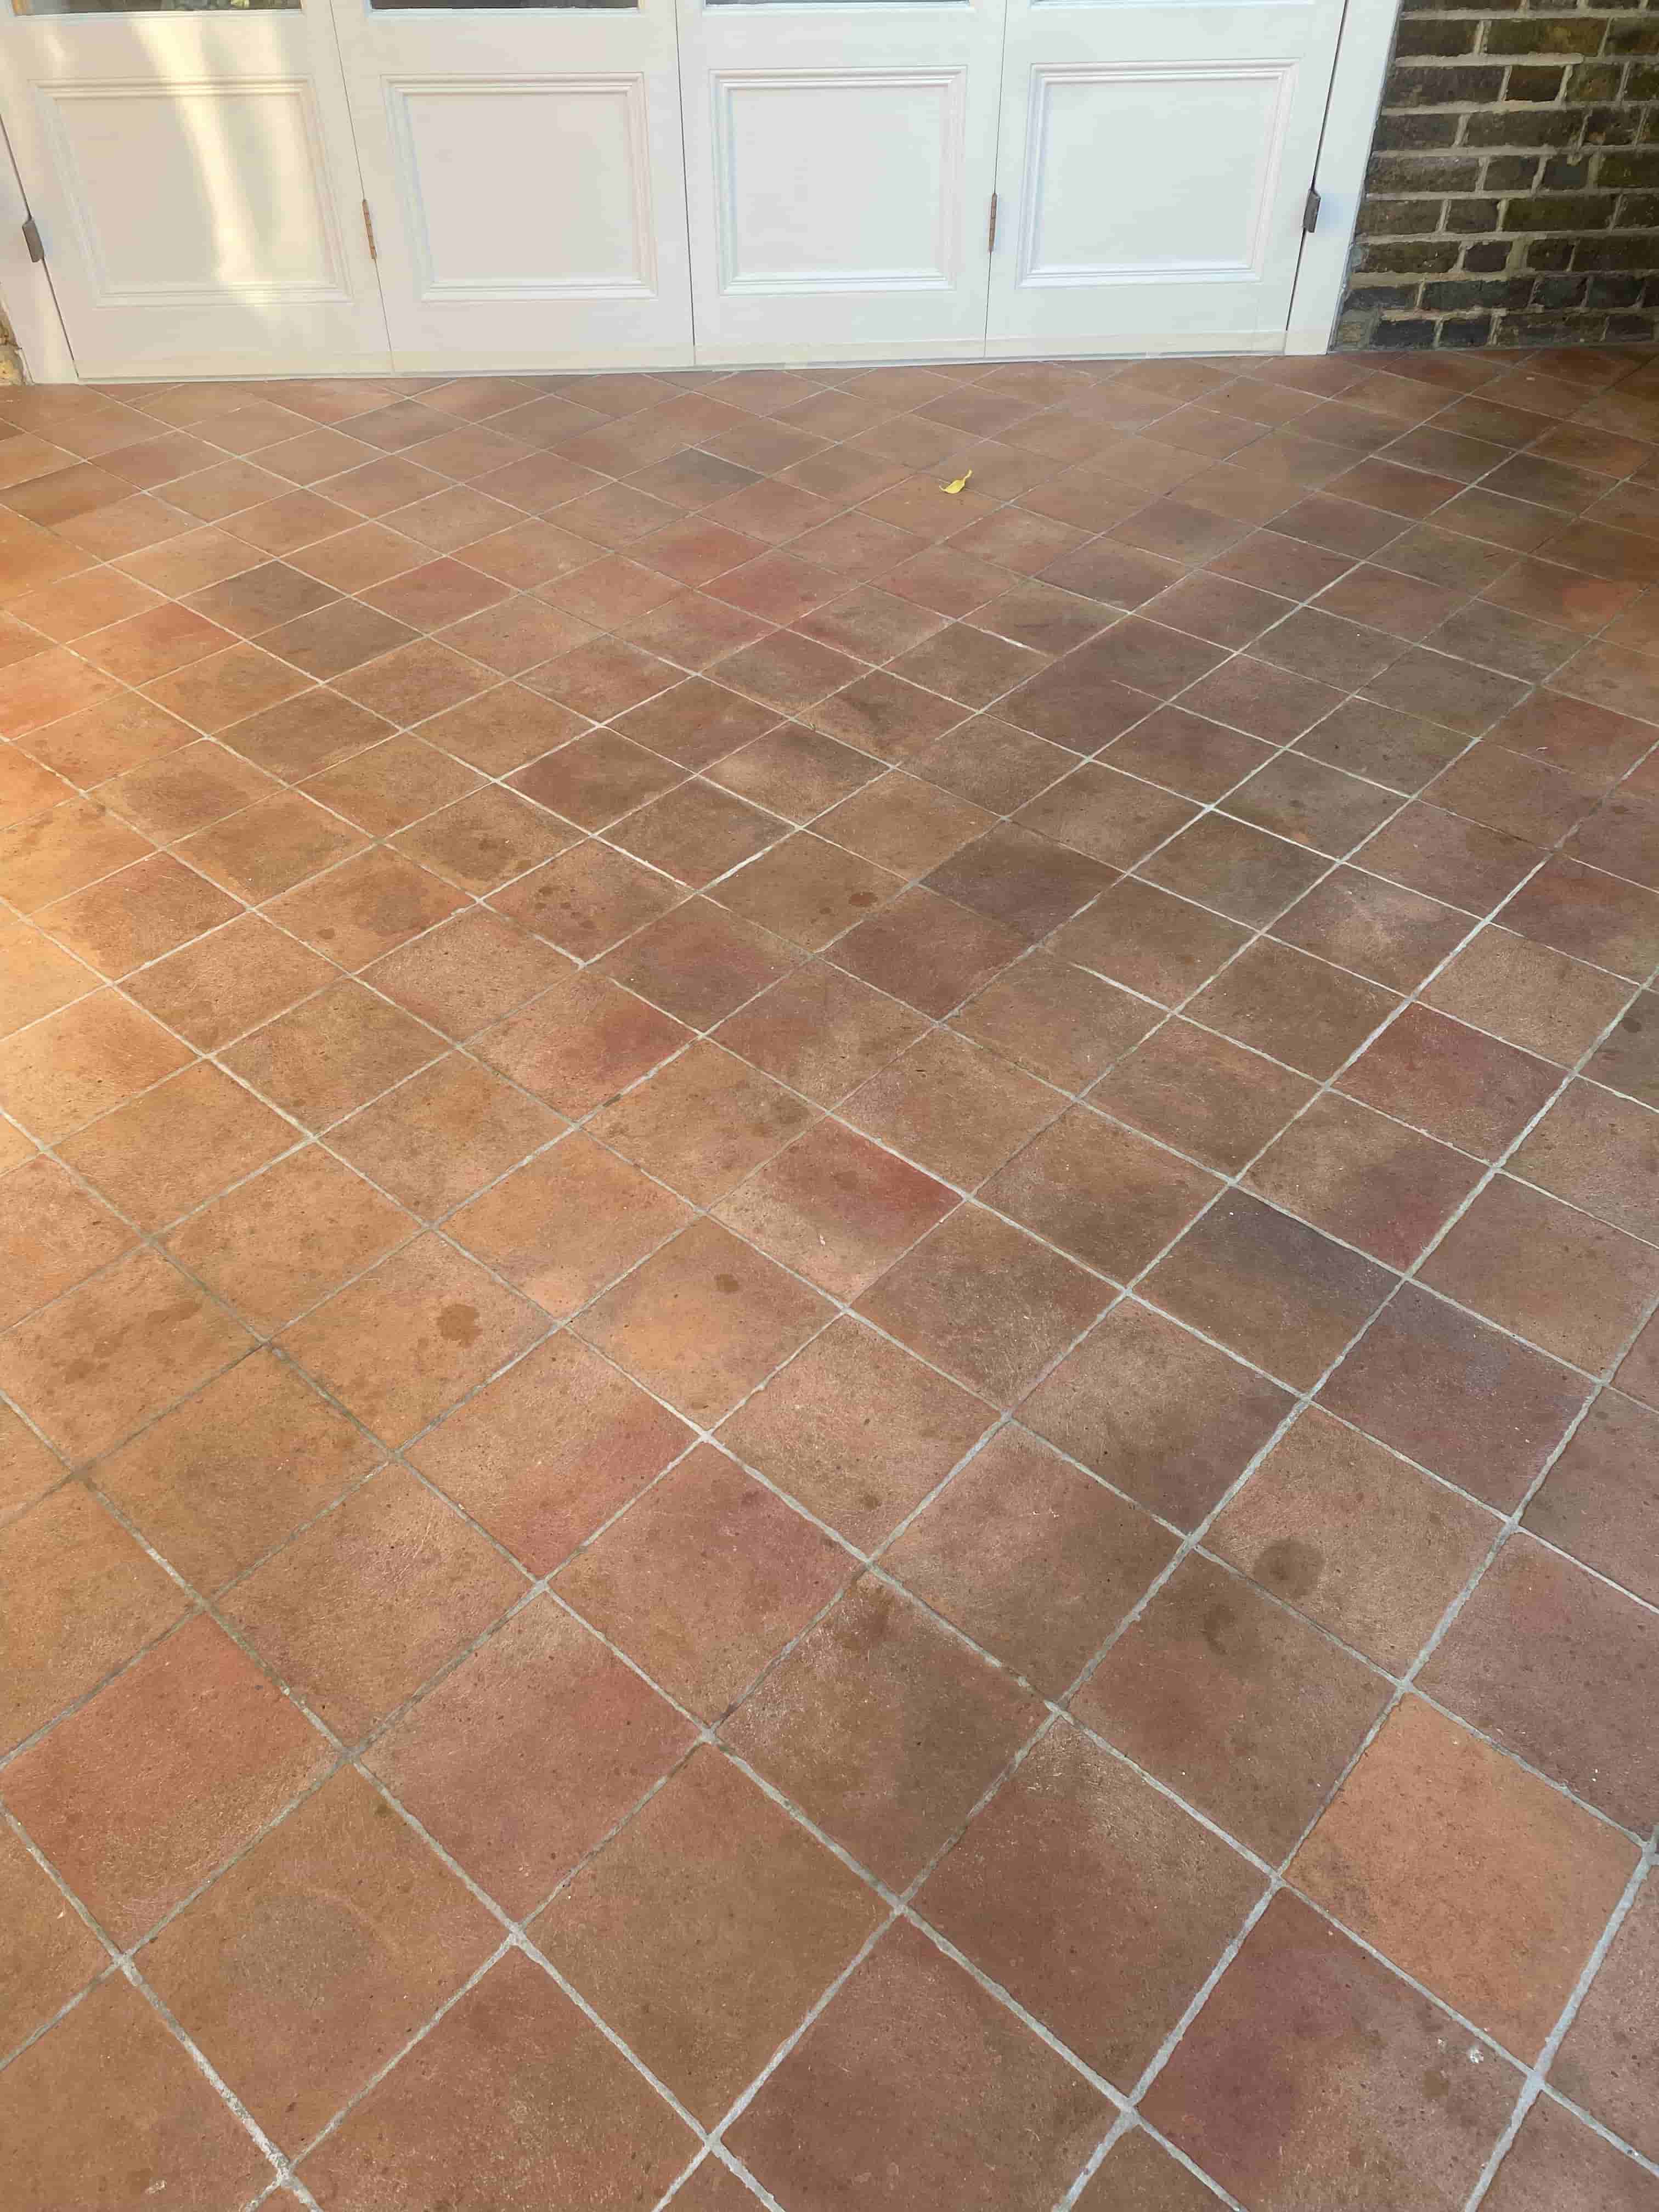 Terracotta Conservatory Floor Before Cleaning Herne Hill London SE24